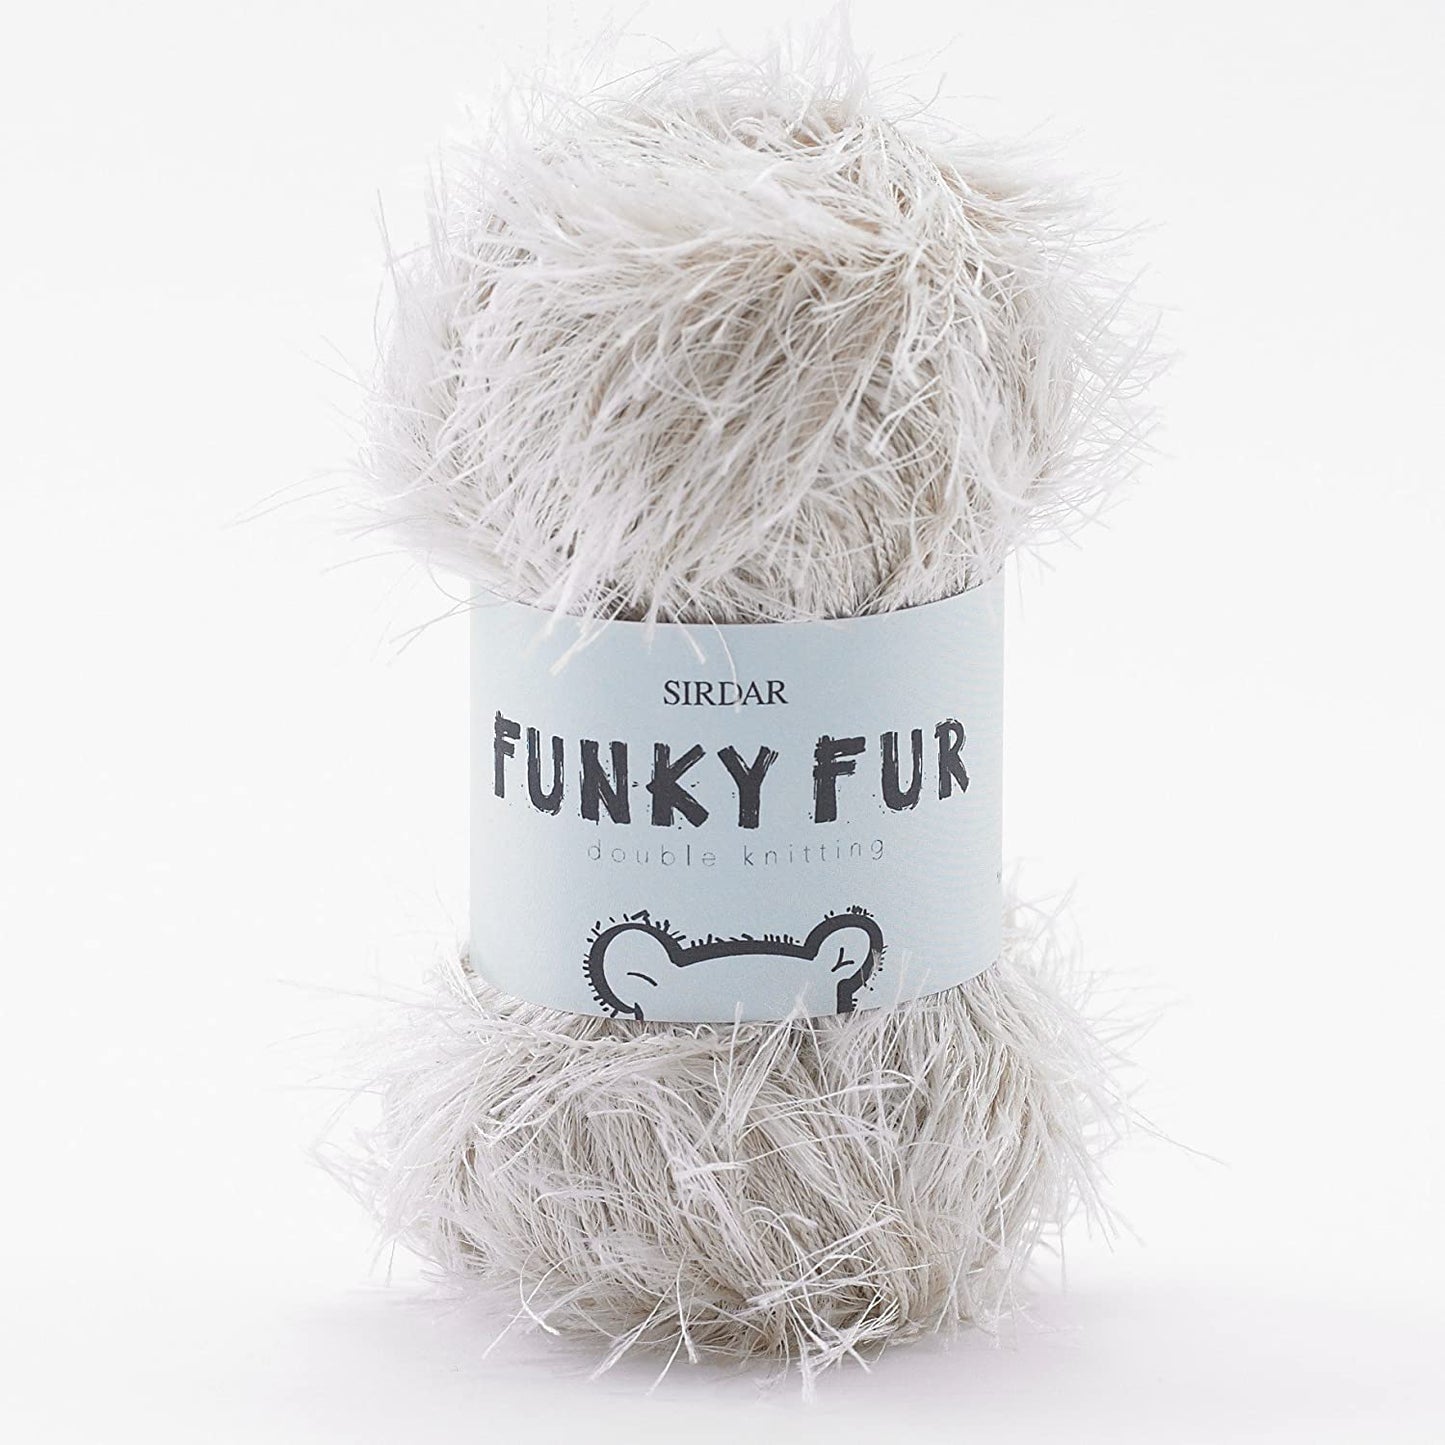 FUNKY FUR DK 50g*   -  More colours available